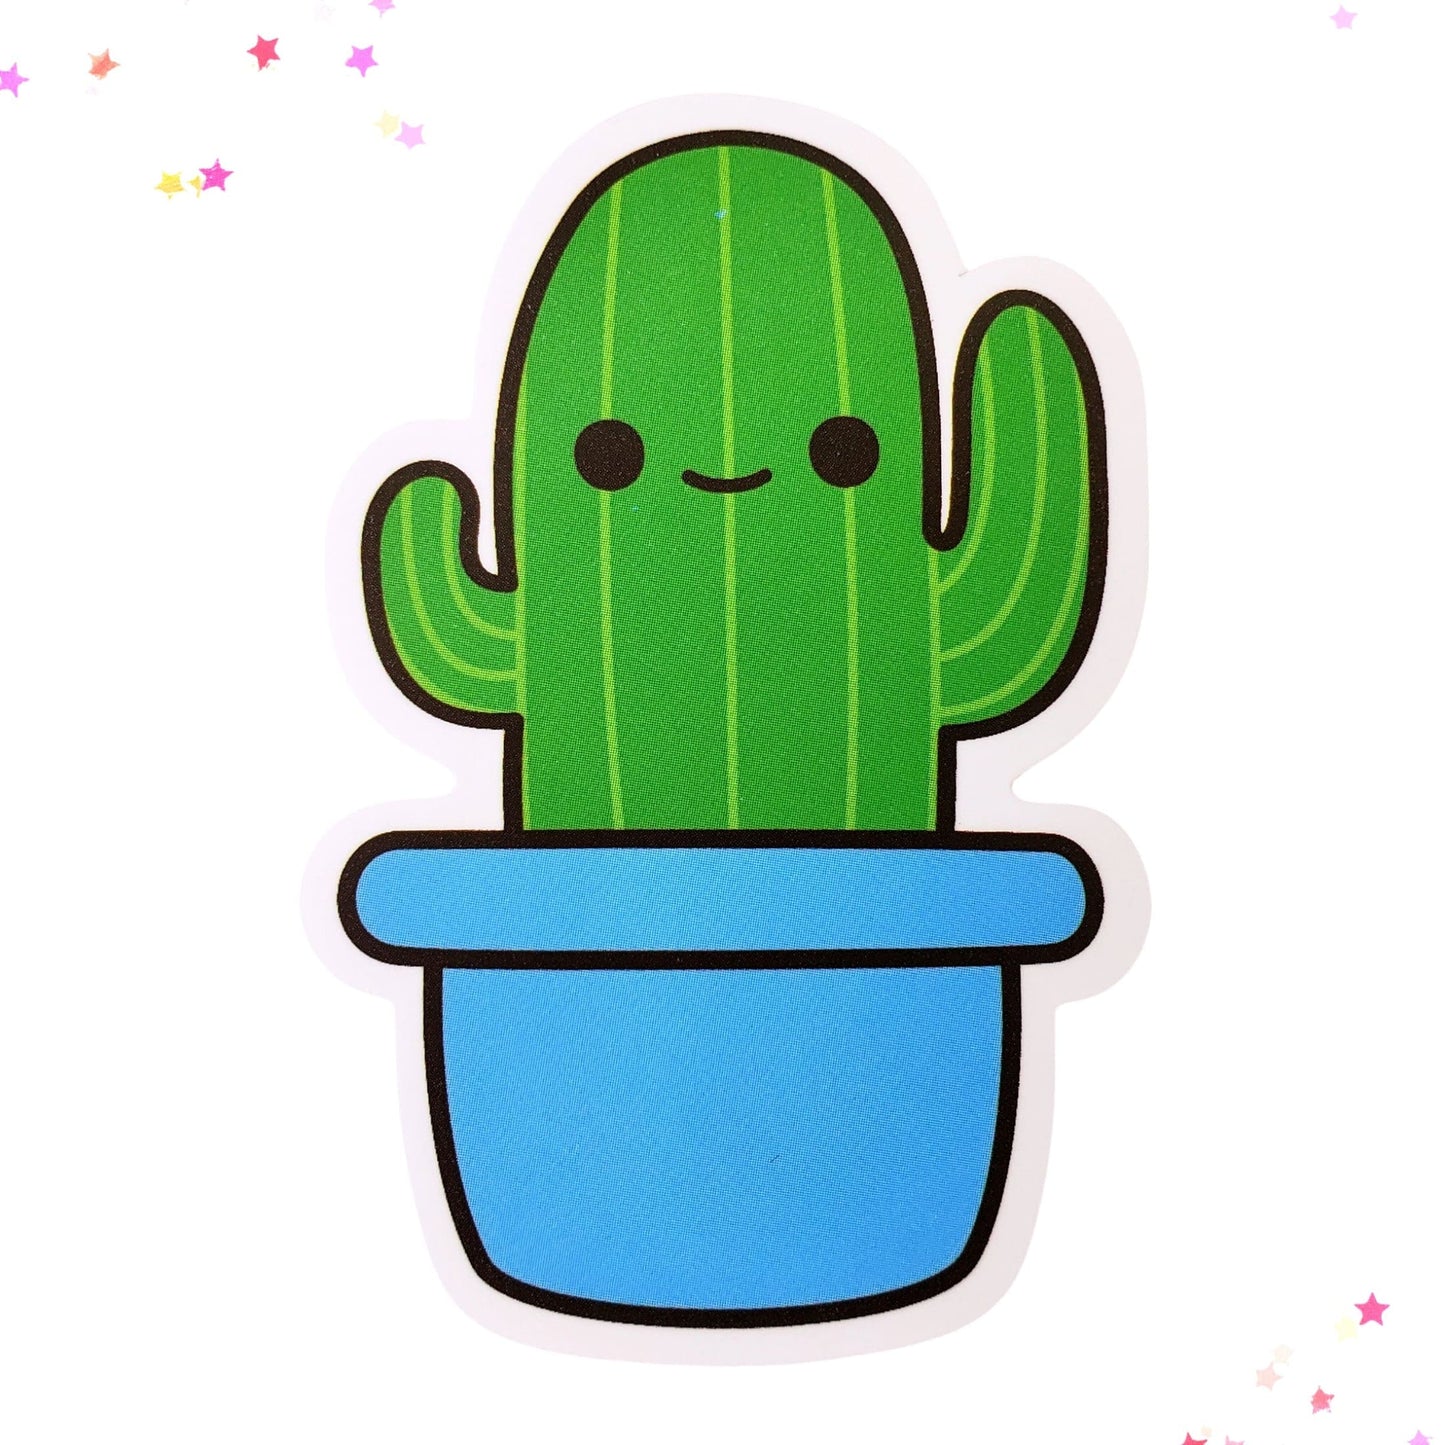 Kawaii Cactus Waterproof Sticker from Confetti Kitty, Only 1.00